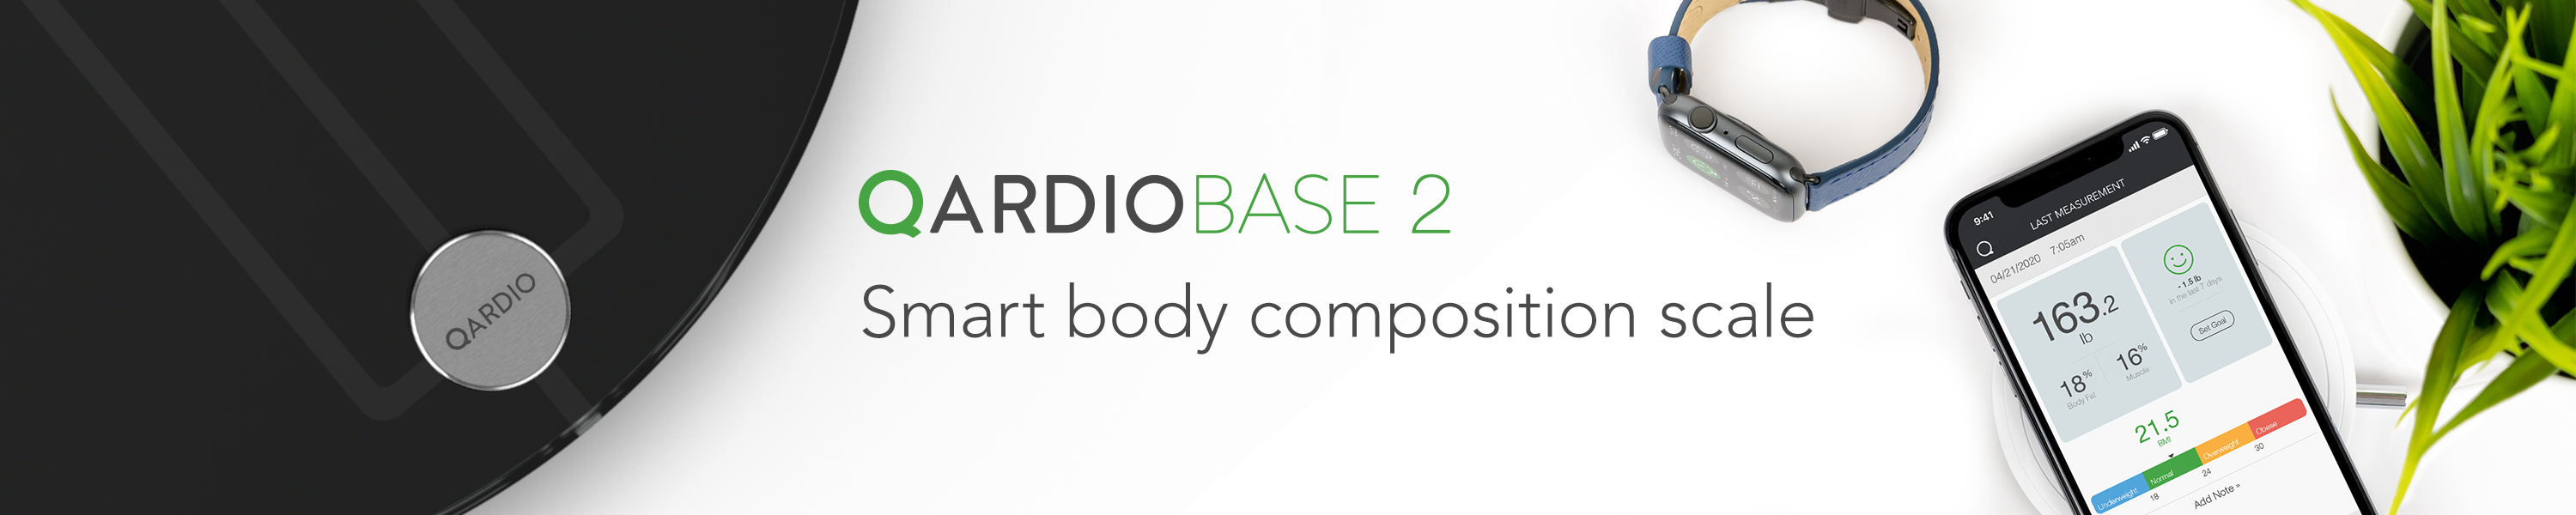  QardioBase2 WiFi Smart Scale and Body Analyzer: monitor weight,  BMI and body composition, easily store, track and share data. Free app for  iOS, Android, Kindle. Works with Apple Health. : Health